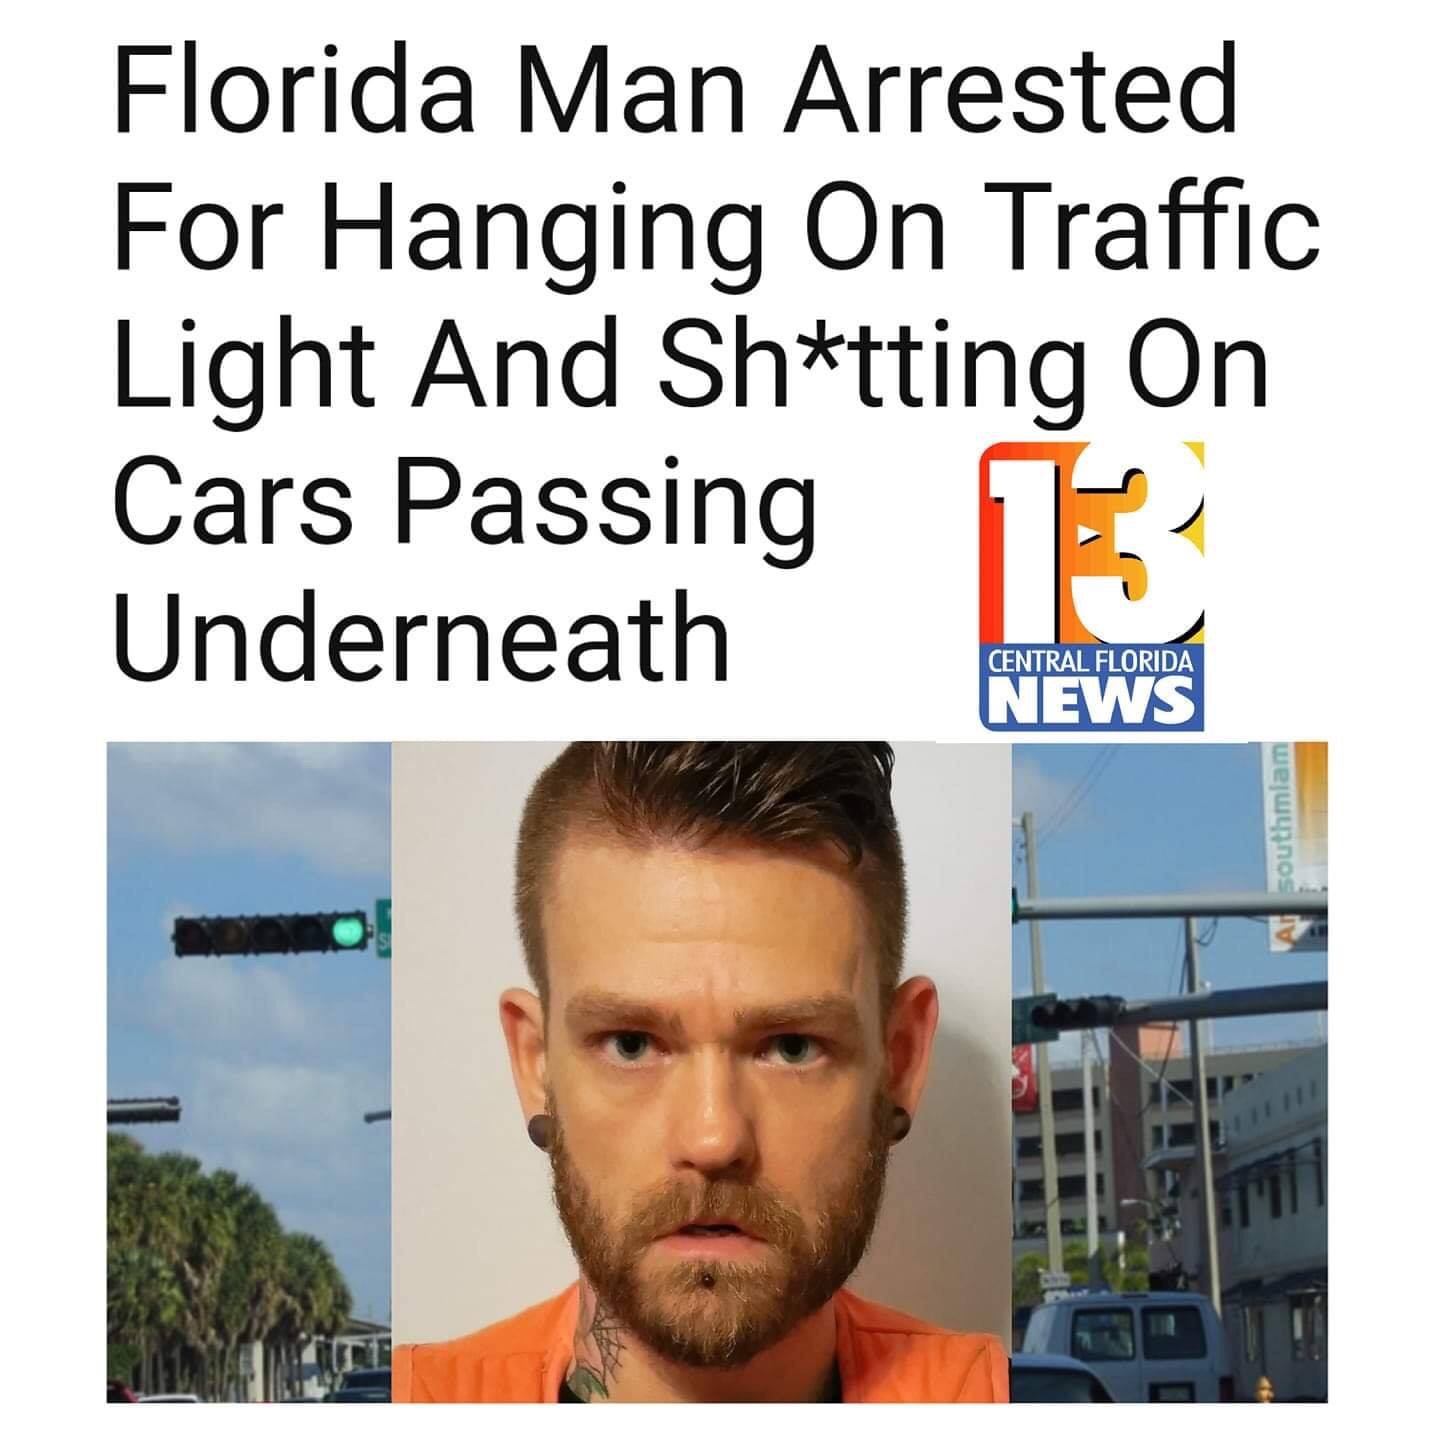 florida man arrested for hanging on traffic light - Florida Man Arrested For Hanging On Traffic Light And Shtting On Cars Passing Underneath Central Florida News southmiam